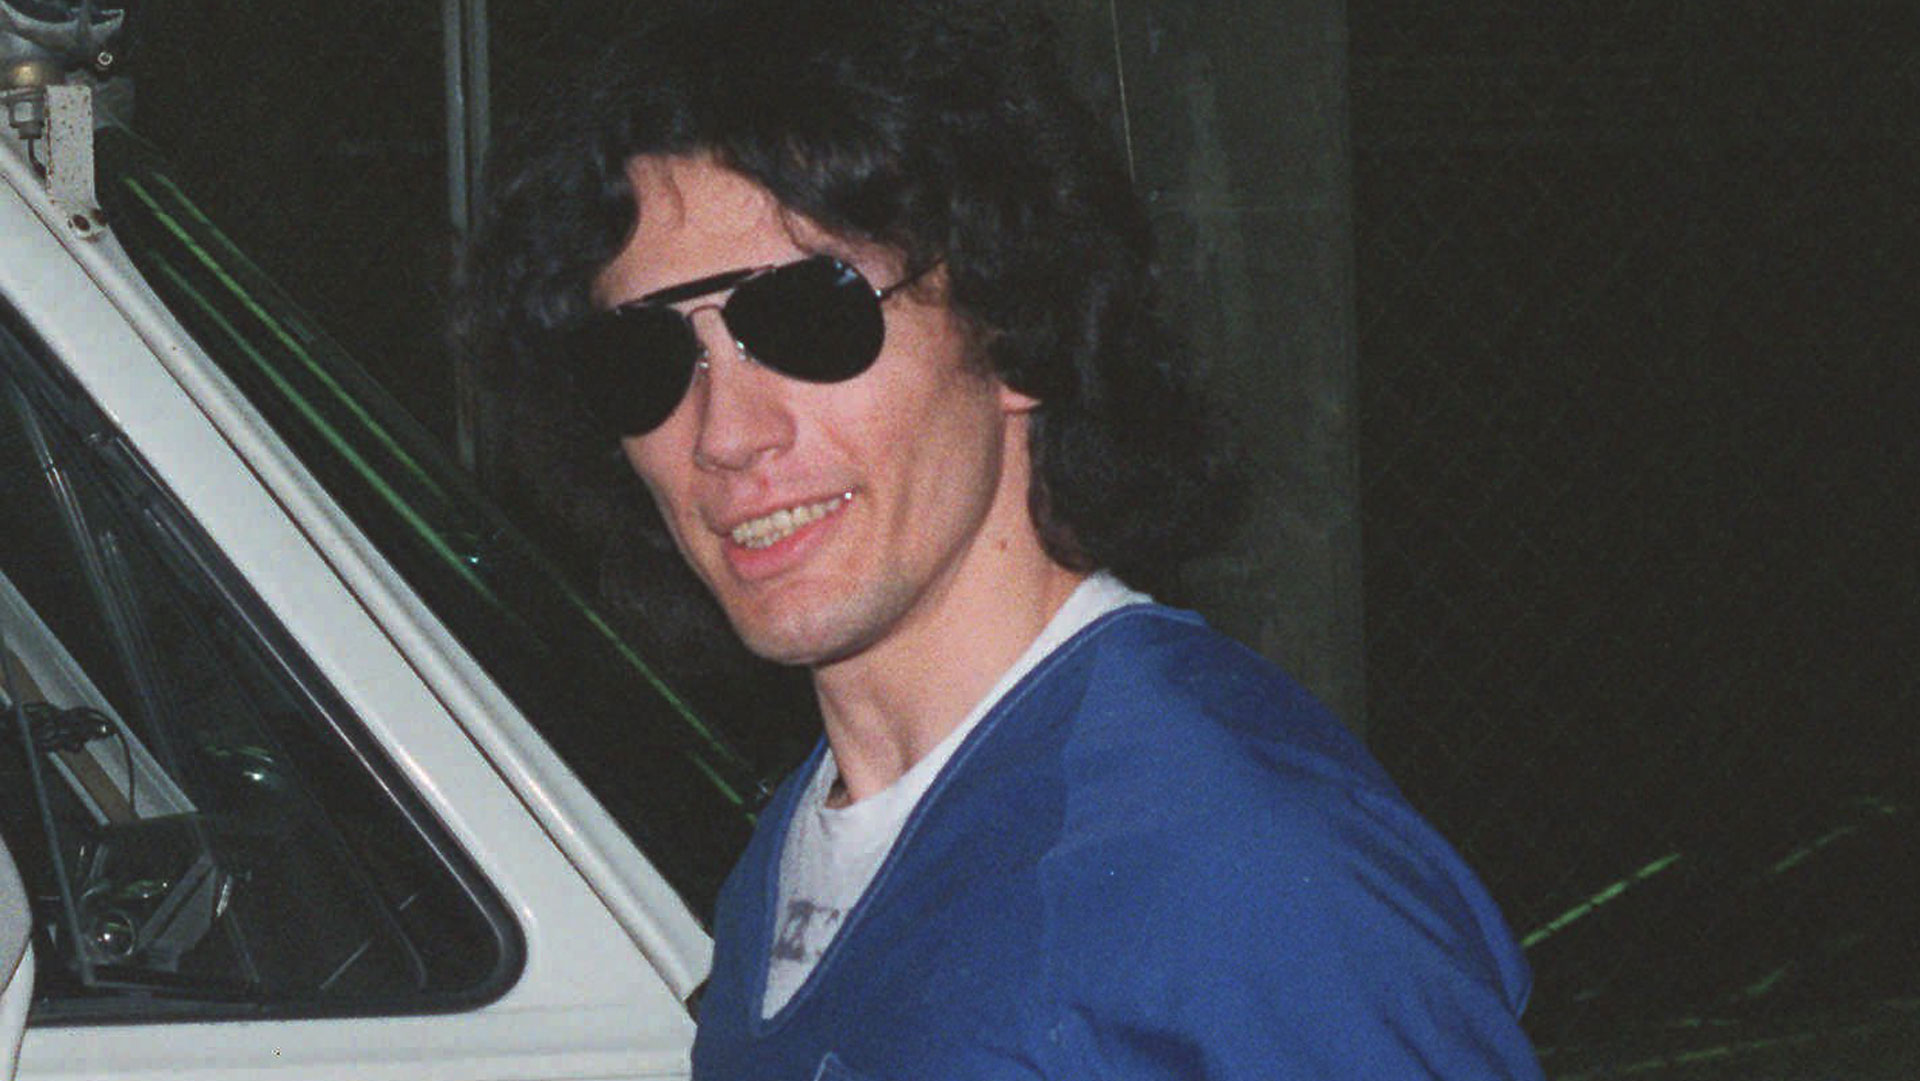 How Richard Ramirez's Decaying, Gross Teeth Helped Catch and Convict the Serial Killer